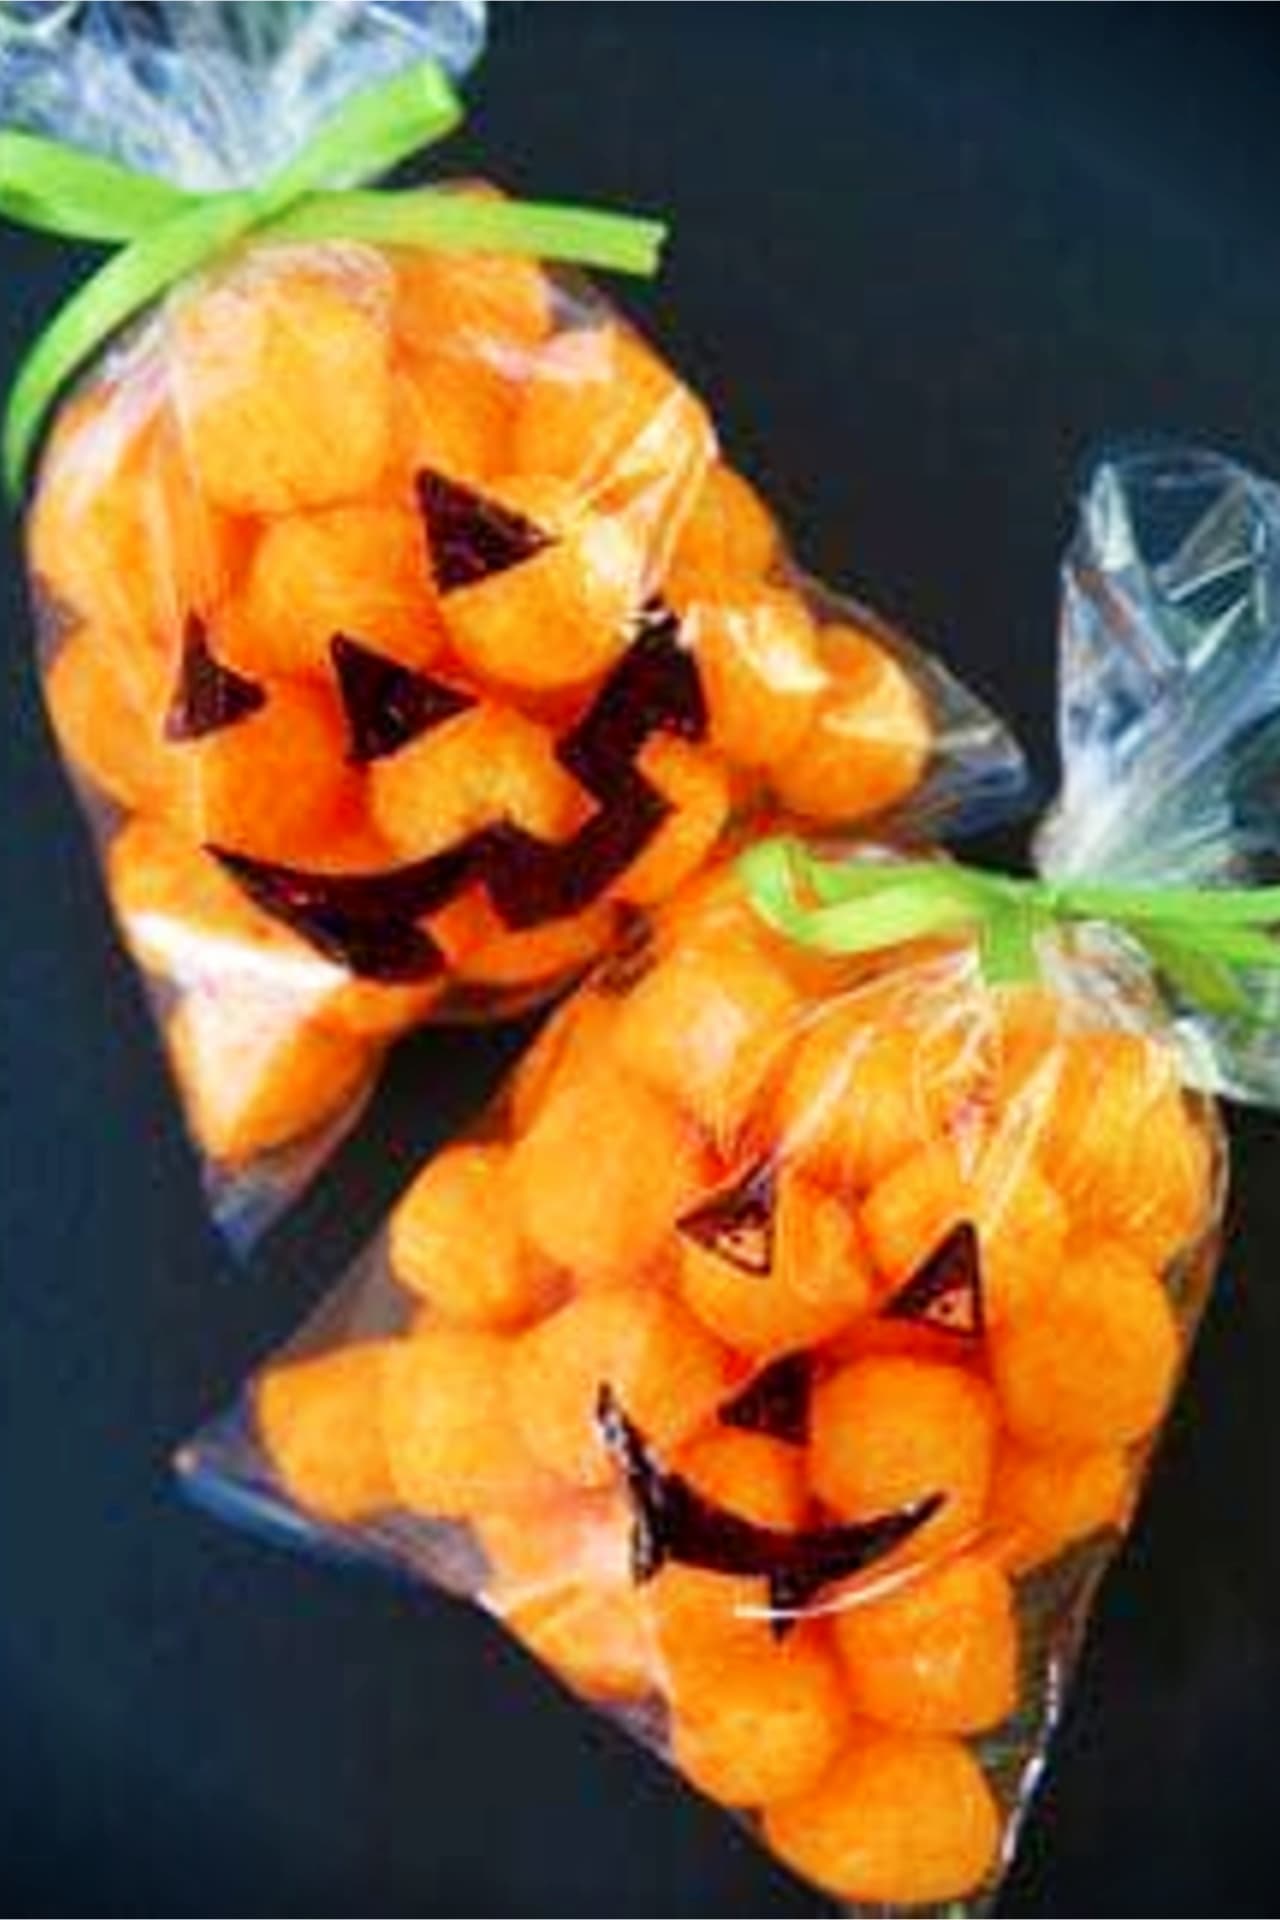 Halloween Treats for Kids!  Halloween treats, snacks, treat bags and treat ideas for kids.  DIY Halloween snacks for school party, class, and more fast and easy kid friendly Halloween treats and snack ideas to make